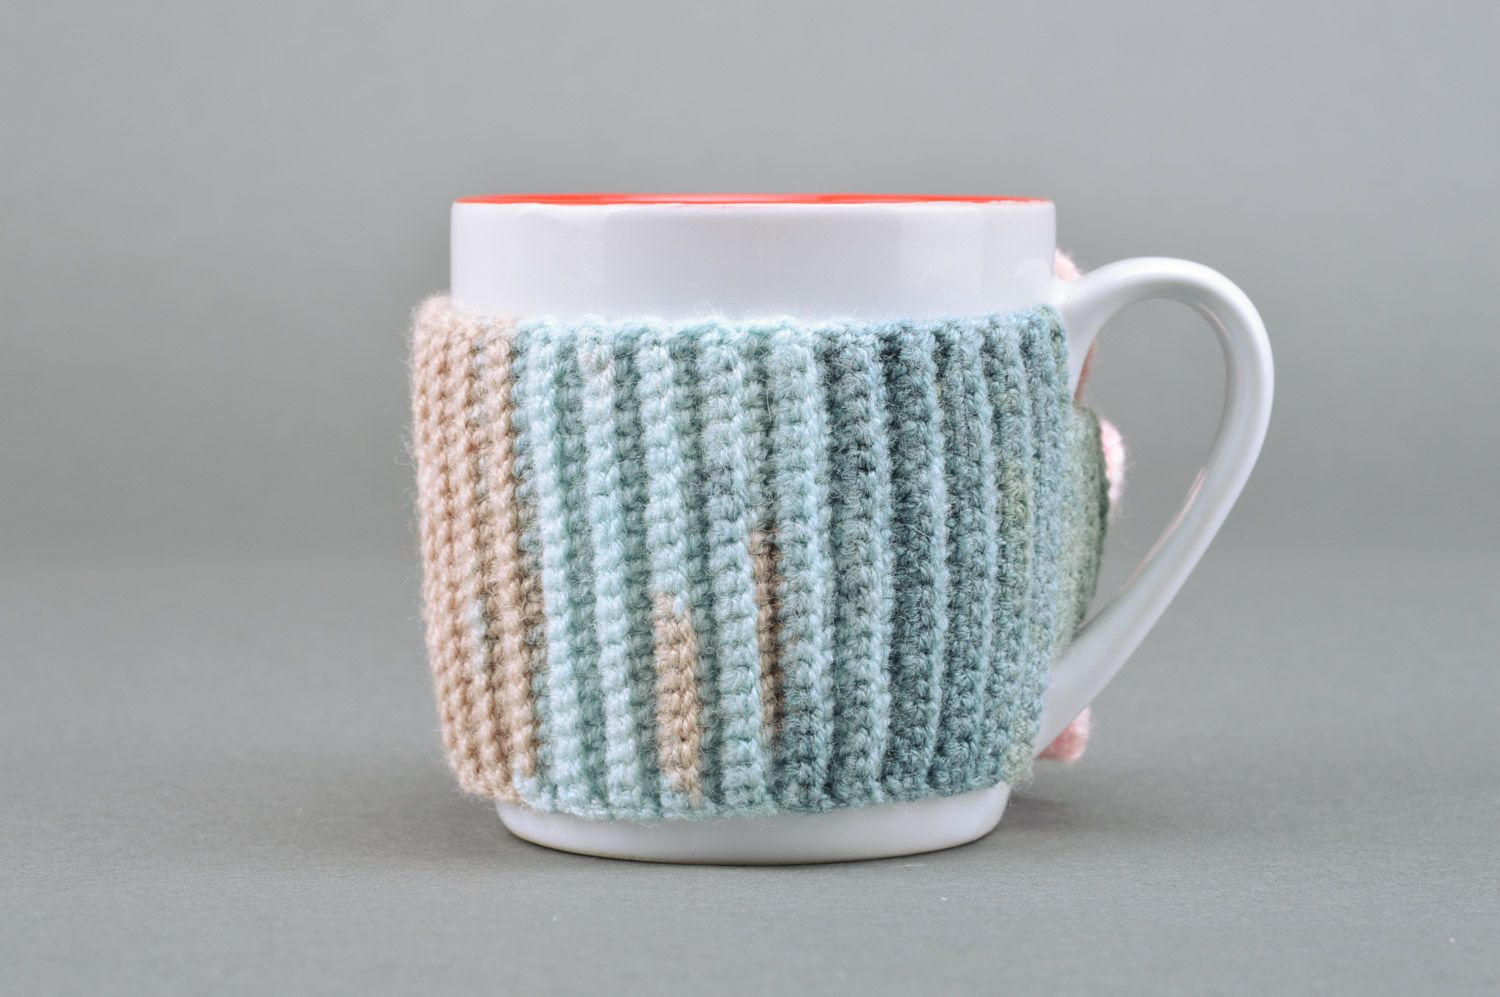 White and orange porcelain cup with crochet wool cover photo 2